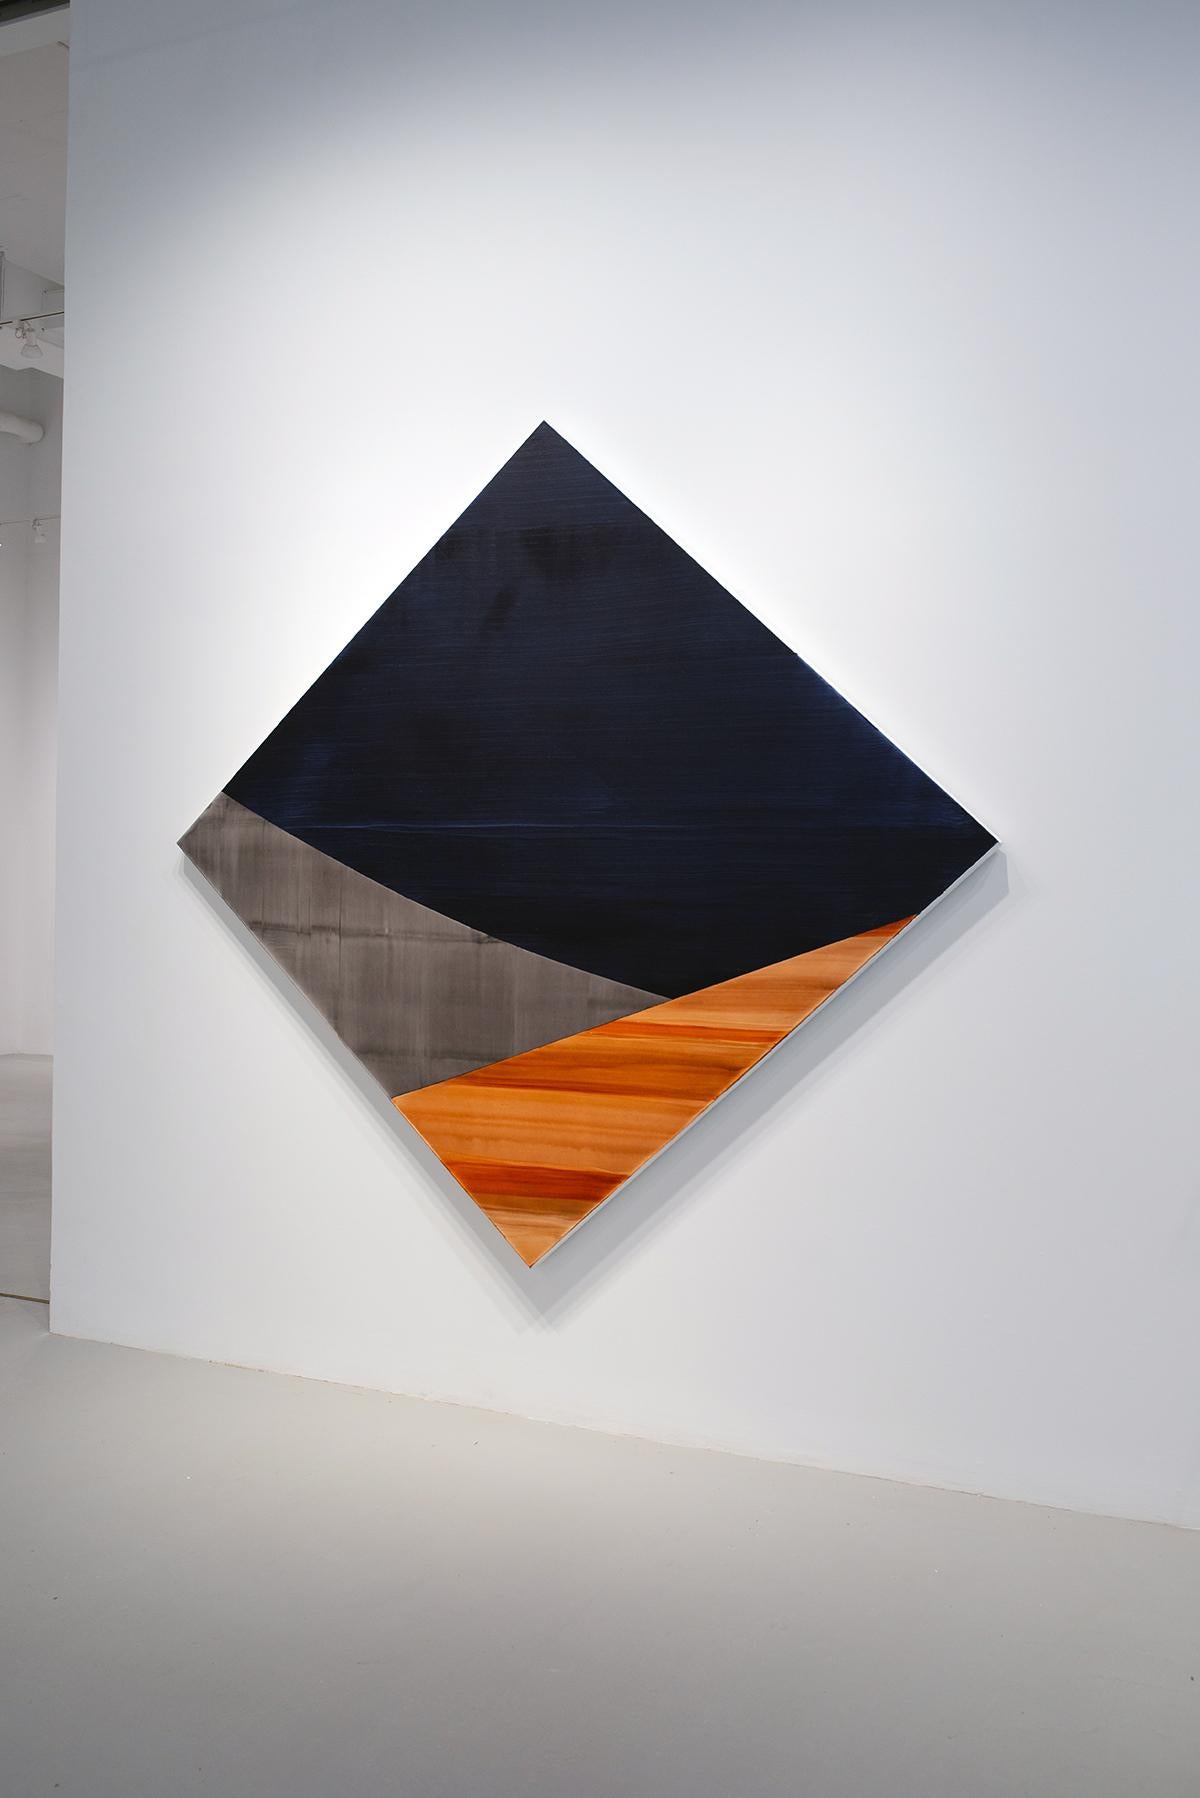 Ricardo Mazal
Diamond 8, 2021
Oil on linen
86.5 x 94.5 inches
219.7 x 240 cm
RM477

Ricardo Mazal, one of Mexico’s most prominent contemporary artists, is known for his lush abstract oil paintings in which he explores spiritual themes.

He is